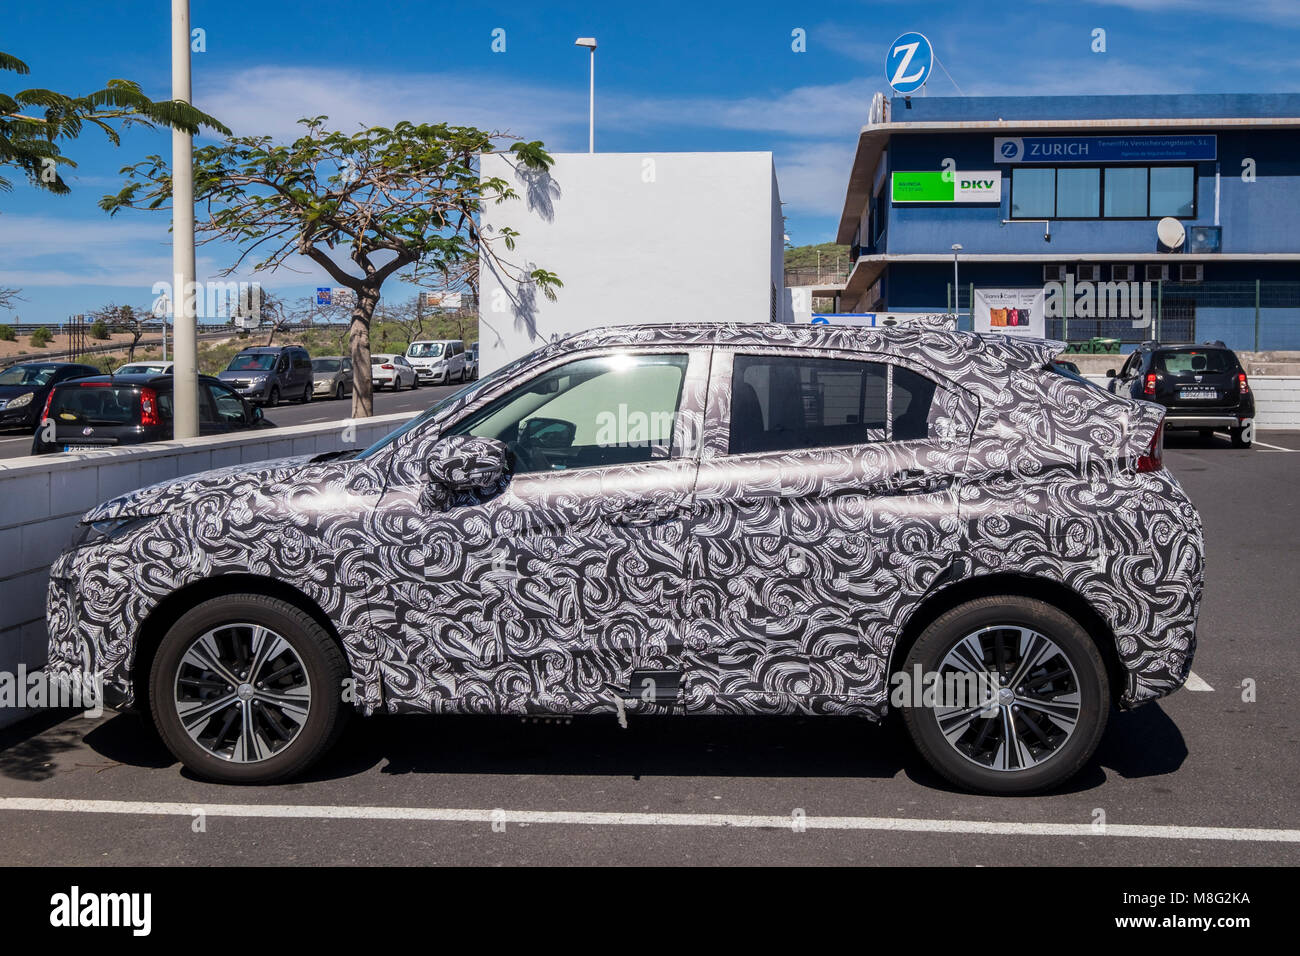 Mitsubishi Eclipse Cross SUV in confusing camoflauge wrap Stock Photo